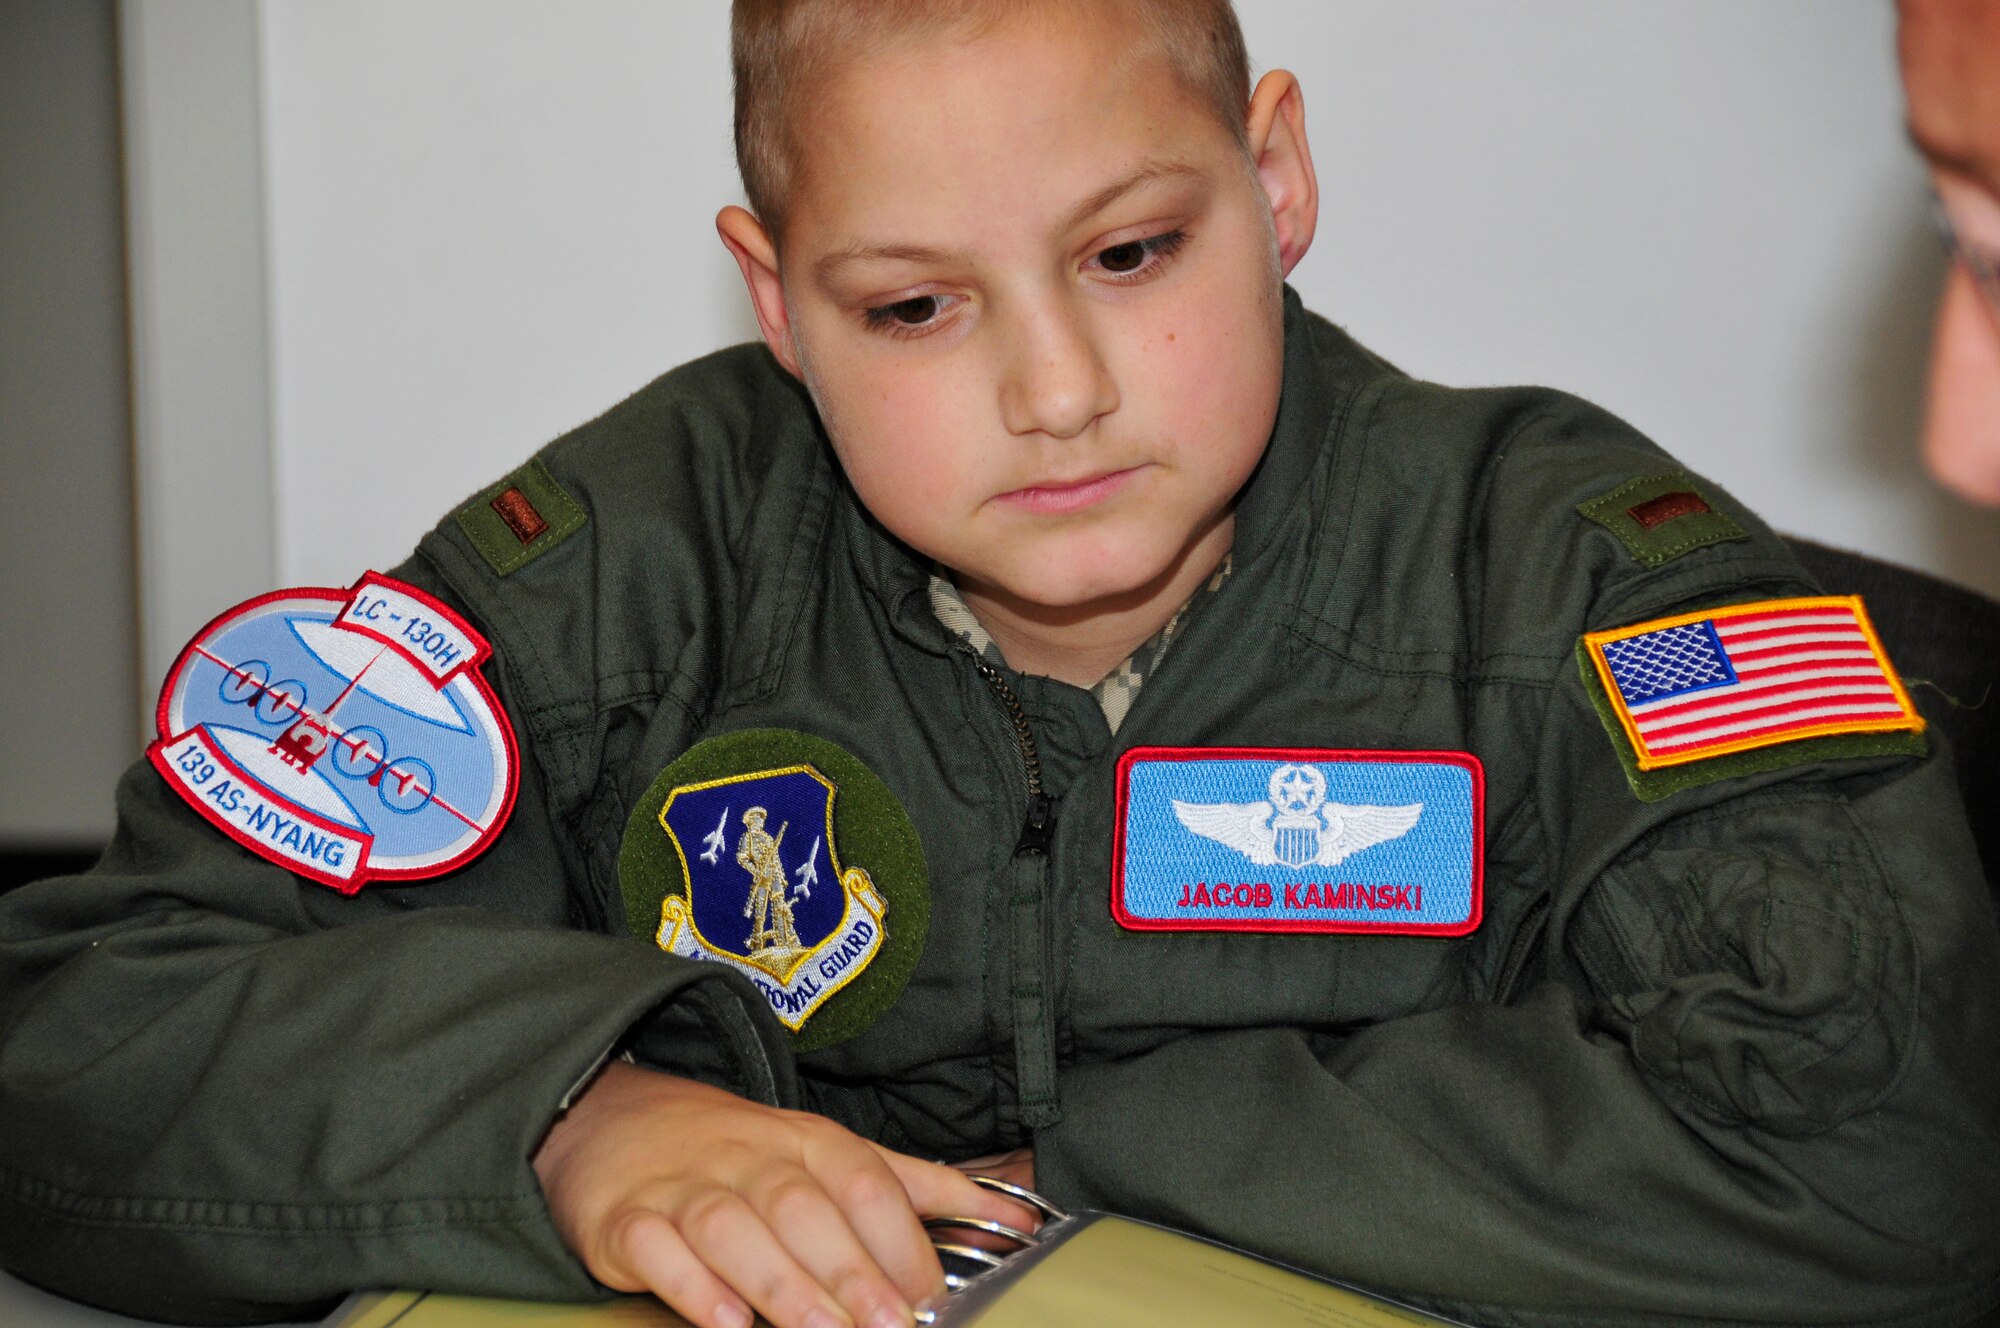 Jacob Kaminski sits in on the flight brief before his mock LC-130 mission. Jacob, 9, came to the base Oct. 6 to fulfill his dream of being a soldier for a day. After spending the day with the Army, he came to the base to see what it was like to be a pilot with the 109th Airlift Wing. Jacob has been diagnosed with leukemia. (U.S. Air Force photo by Master Sgt. Willie Gizara)